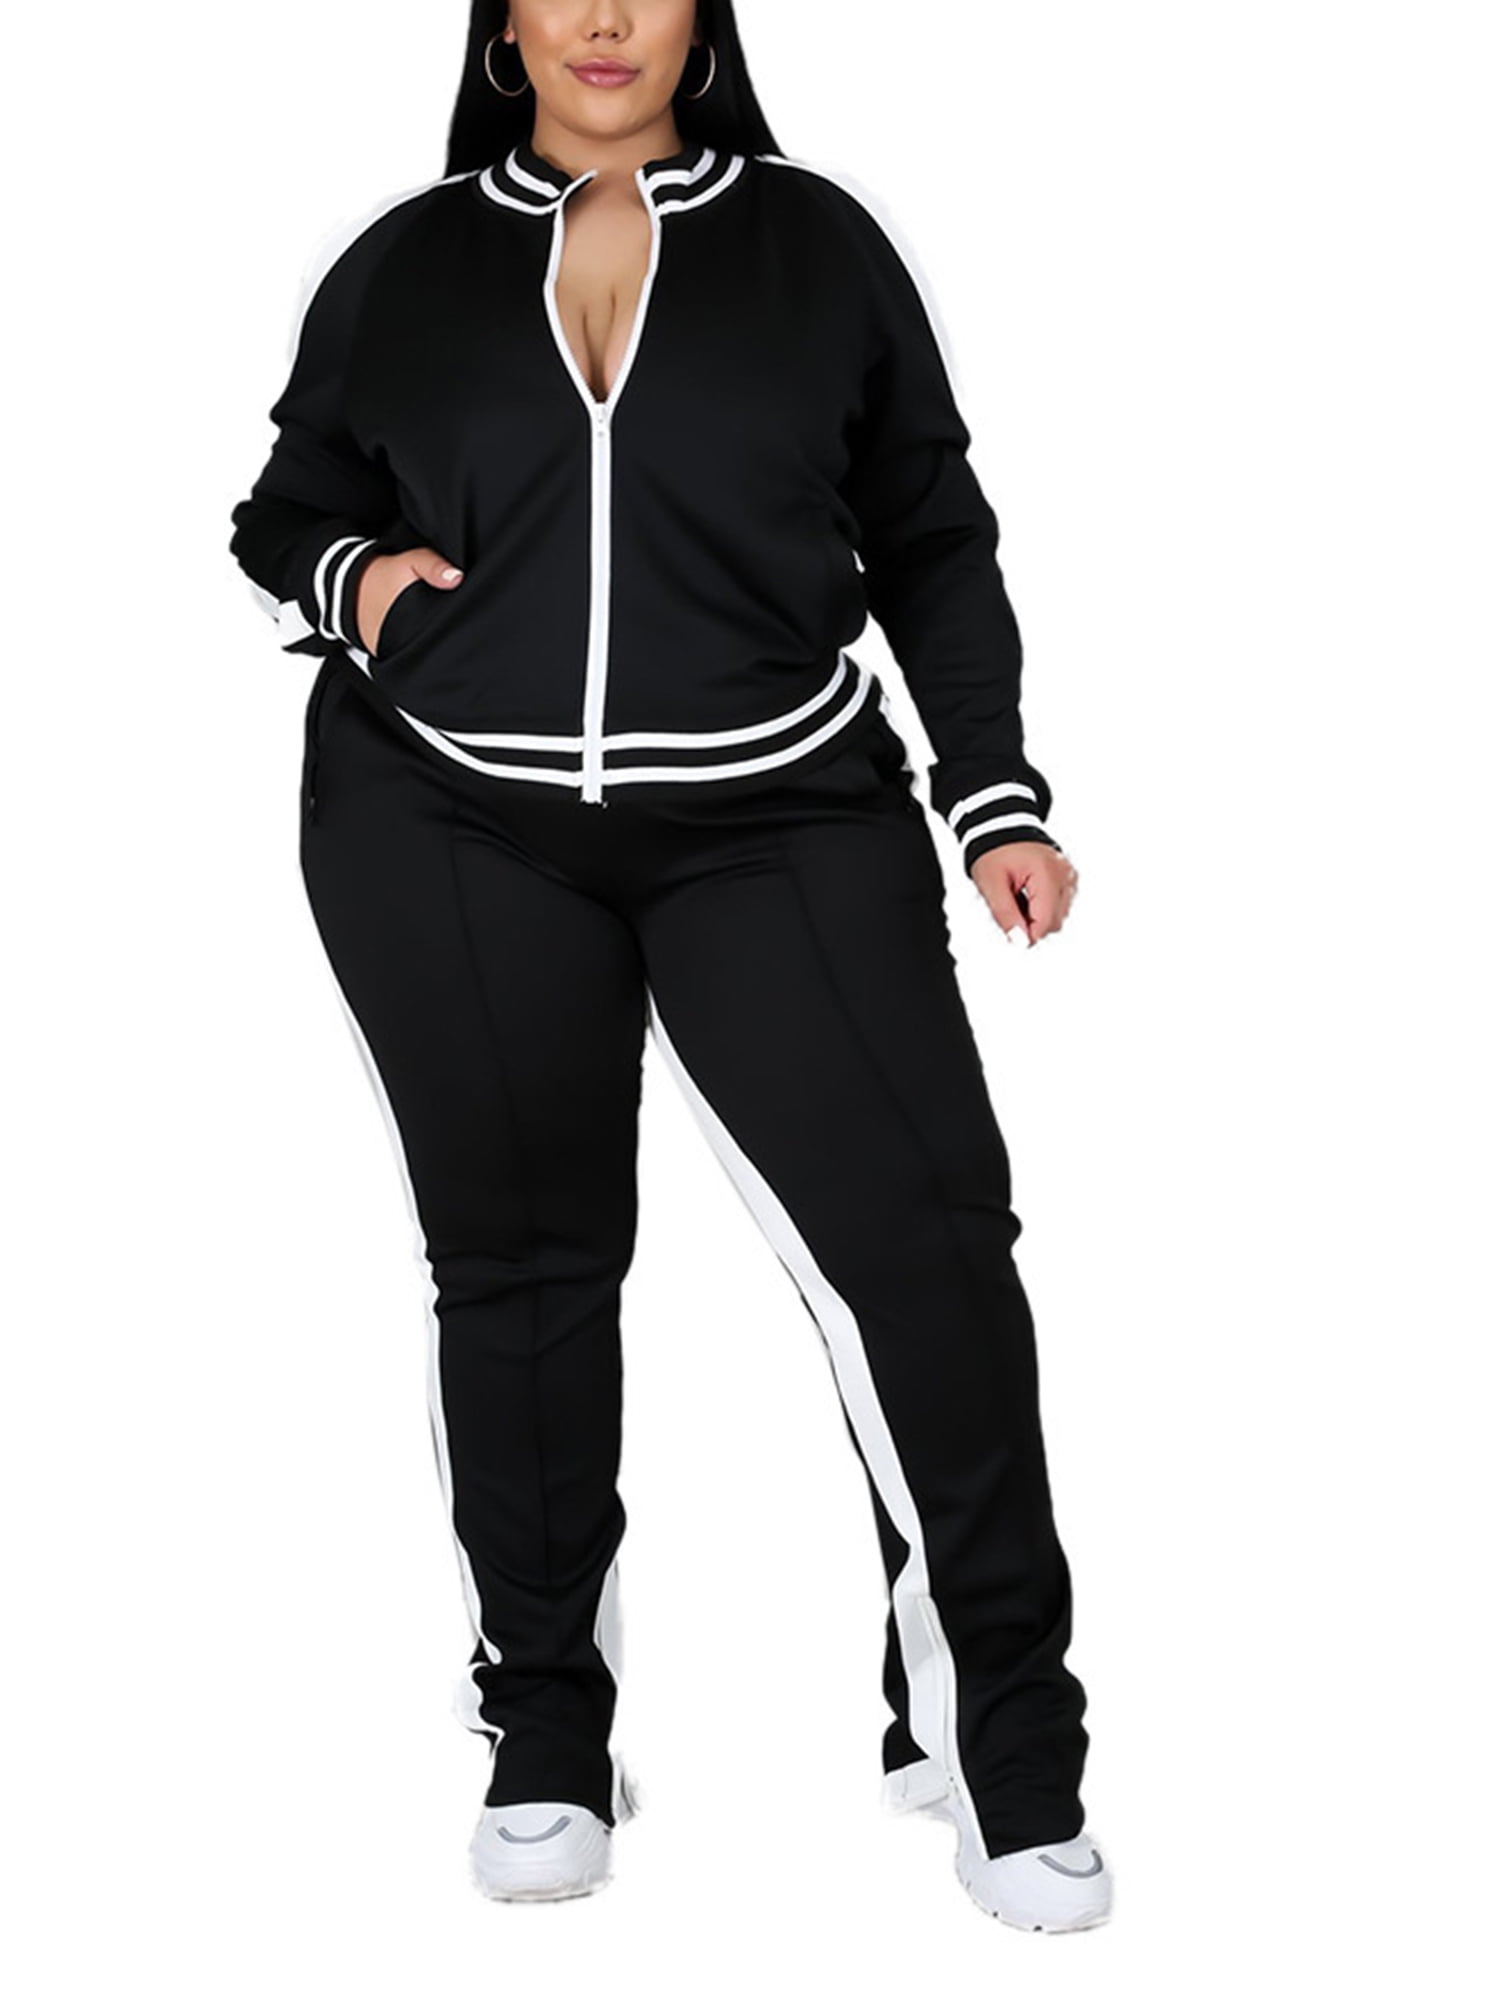 Women's 2 Piece Tracksuit Set Long Sleeve Cropped Hoodied Sweatsuits +  Sweatpants Sports Outfit Workout Jogger Suit Plus Size 